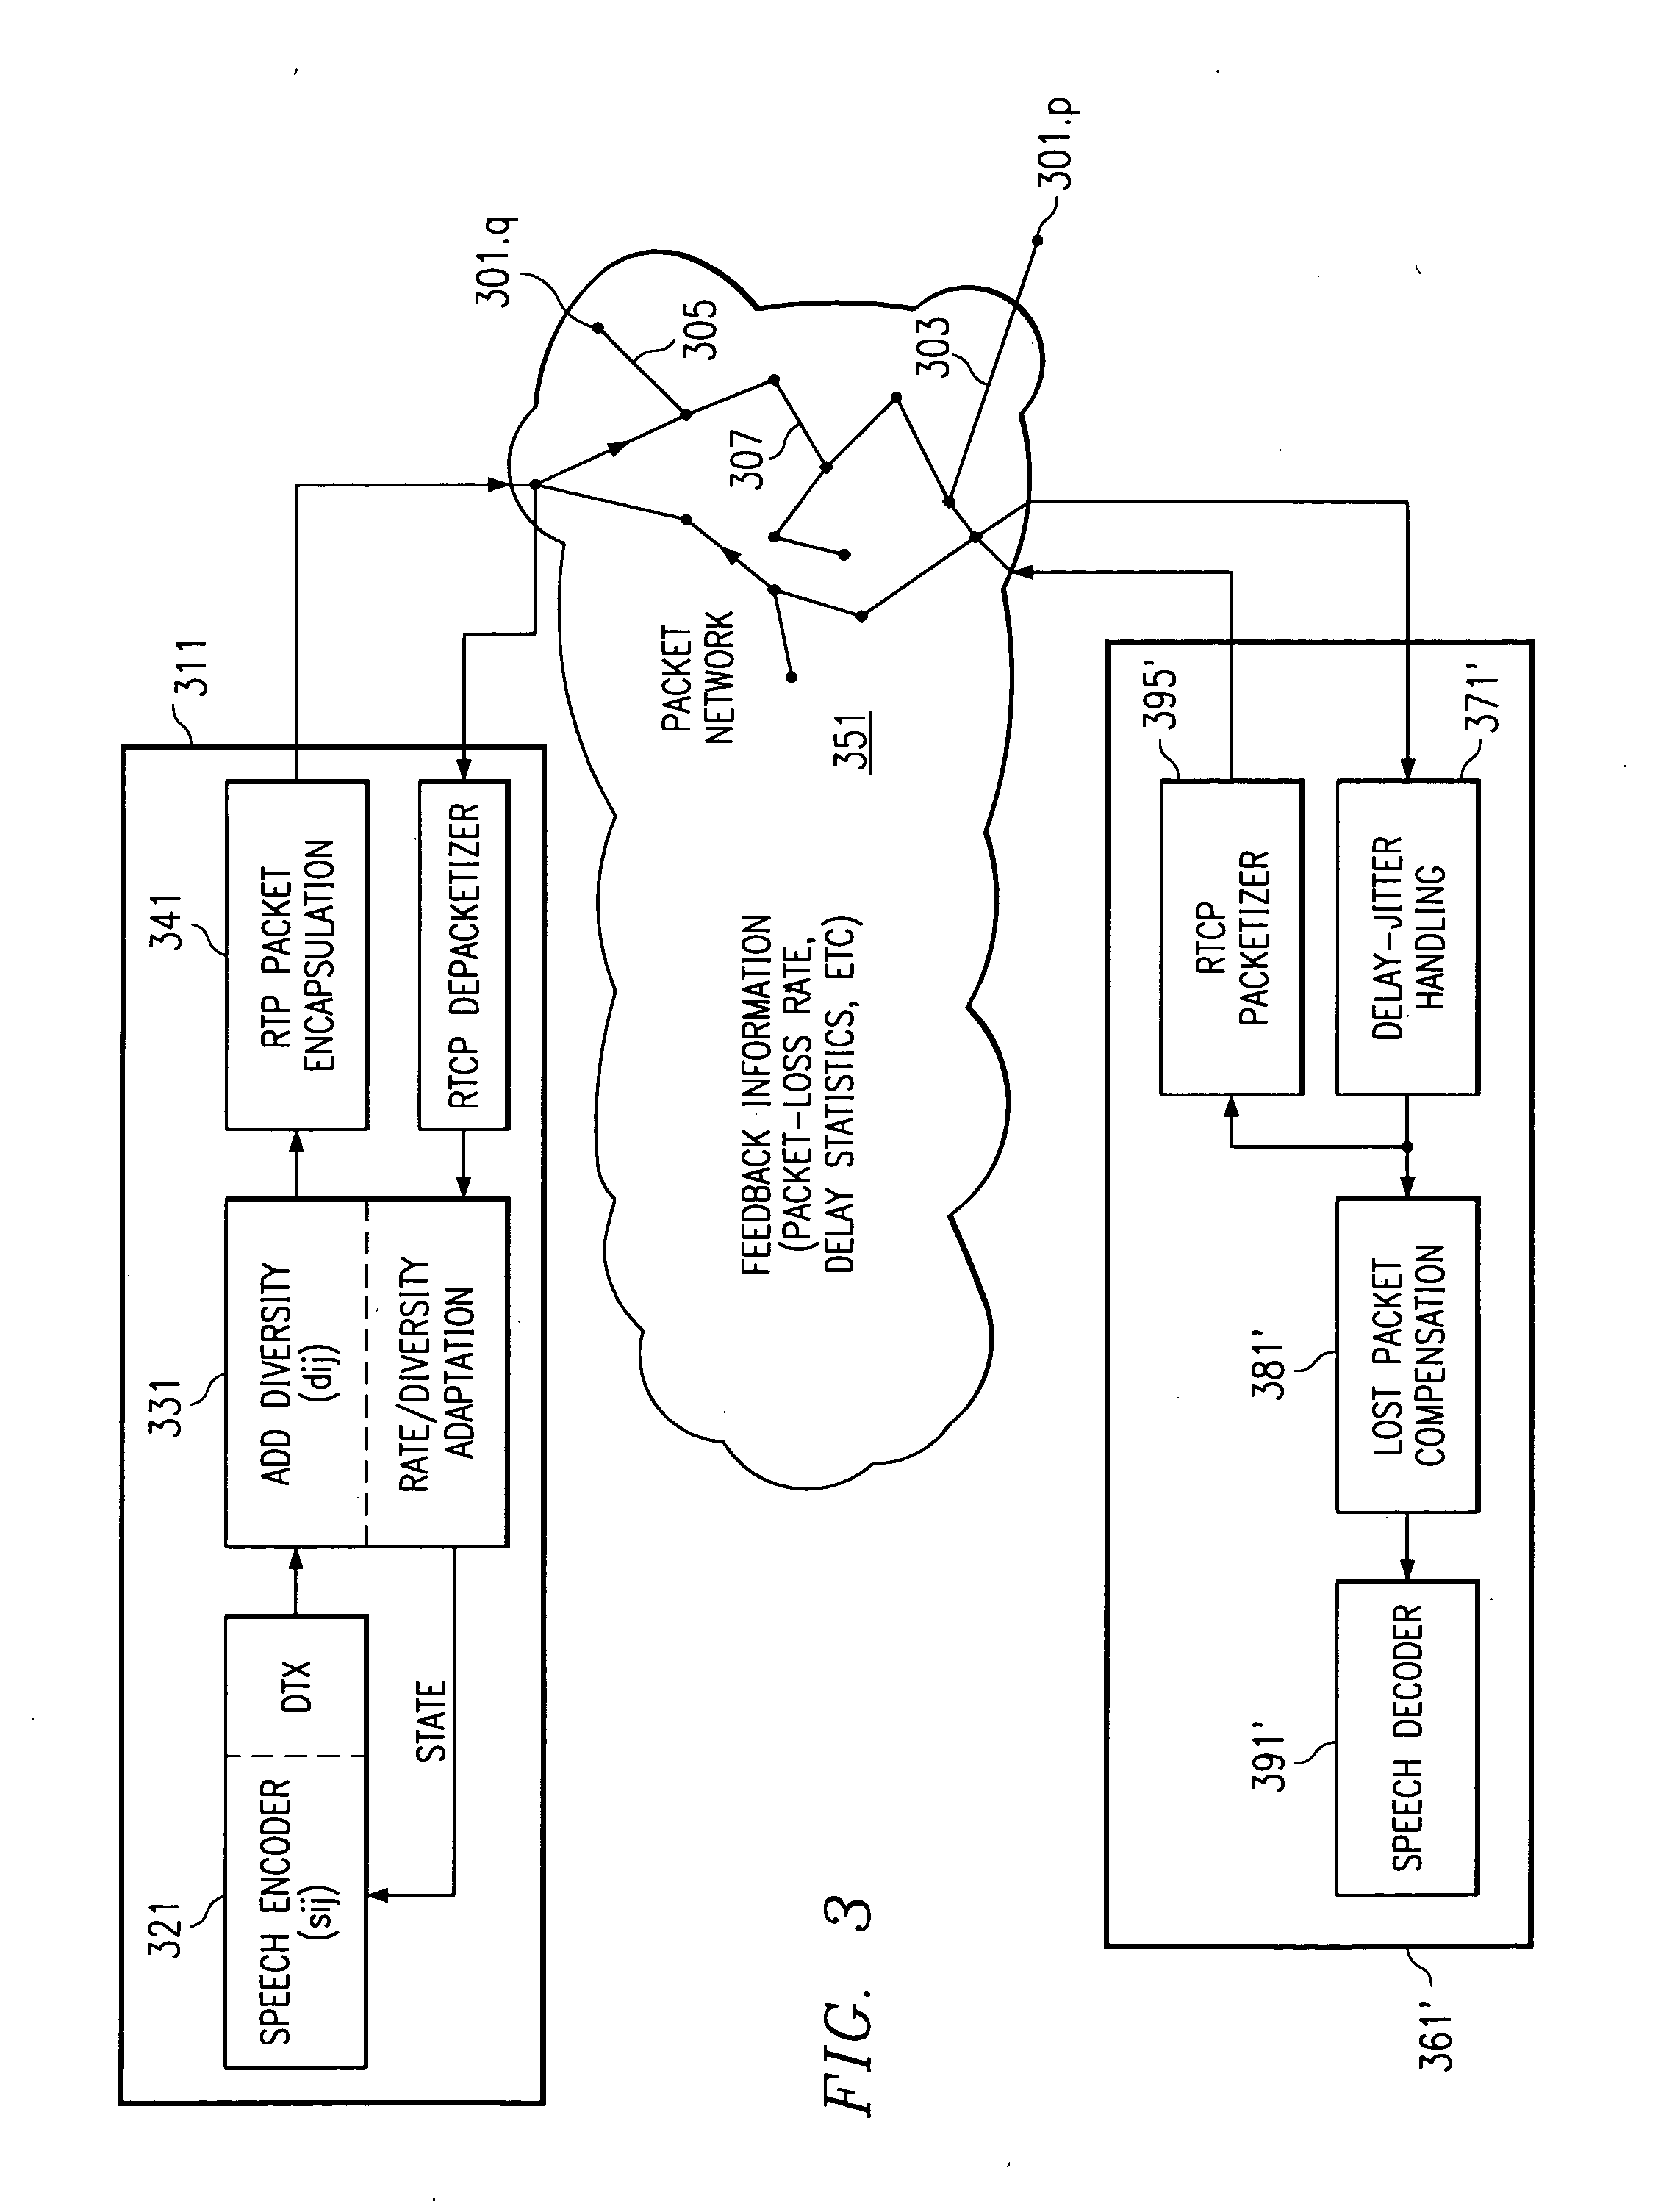 Systems, processes and integrated circuits for rate and/or diversity adaptation for packet communications